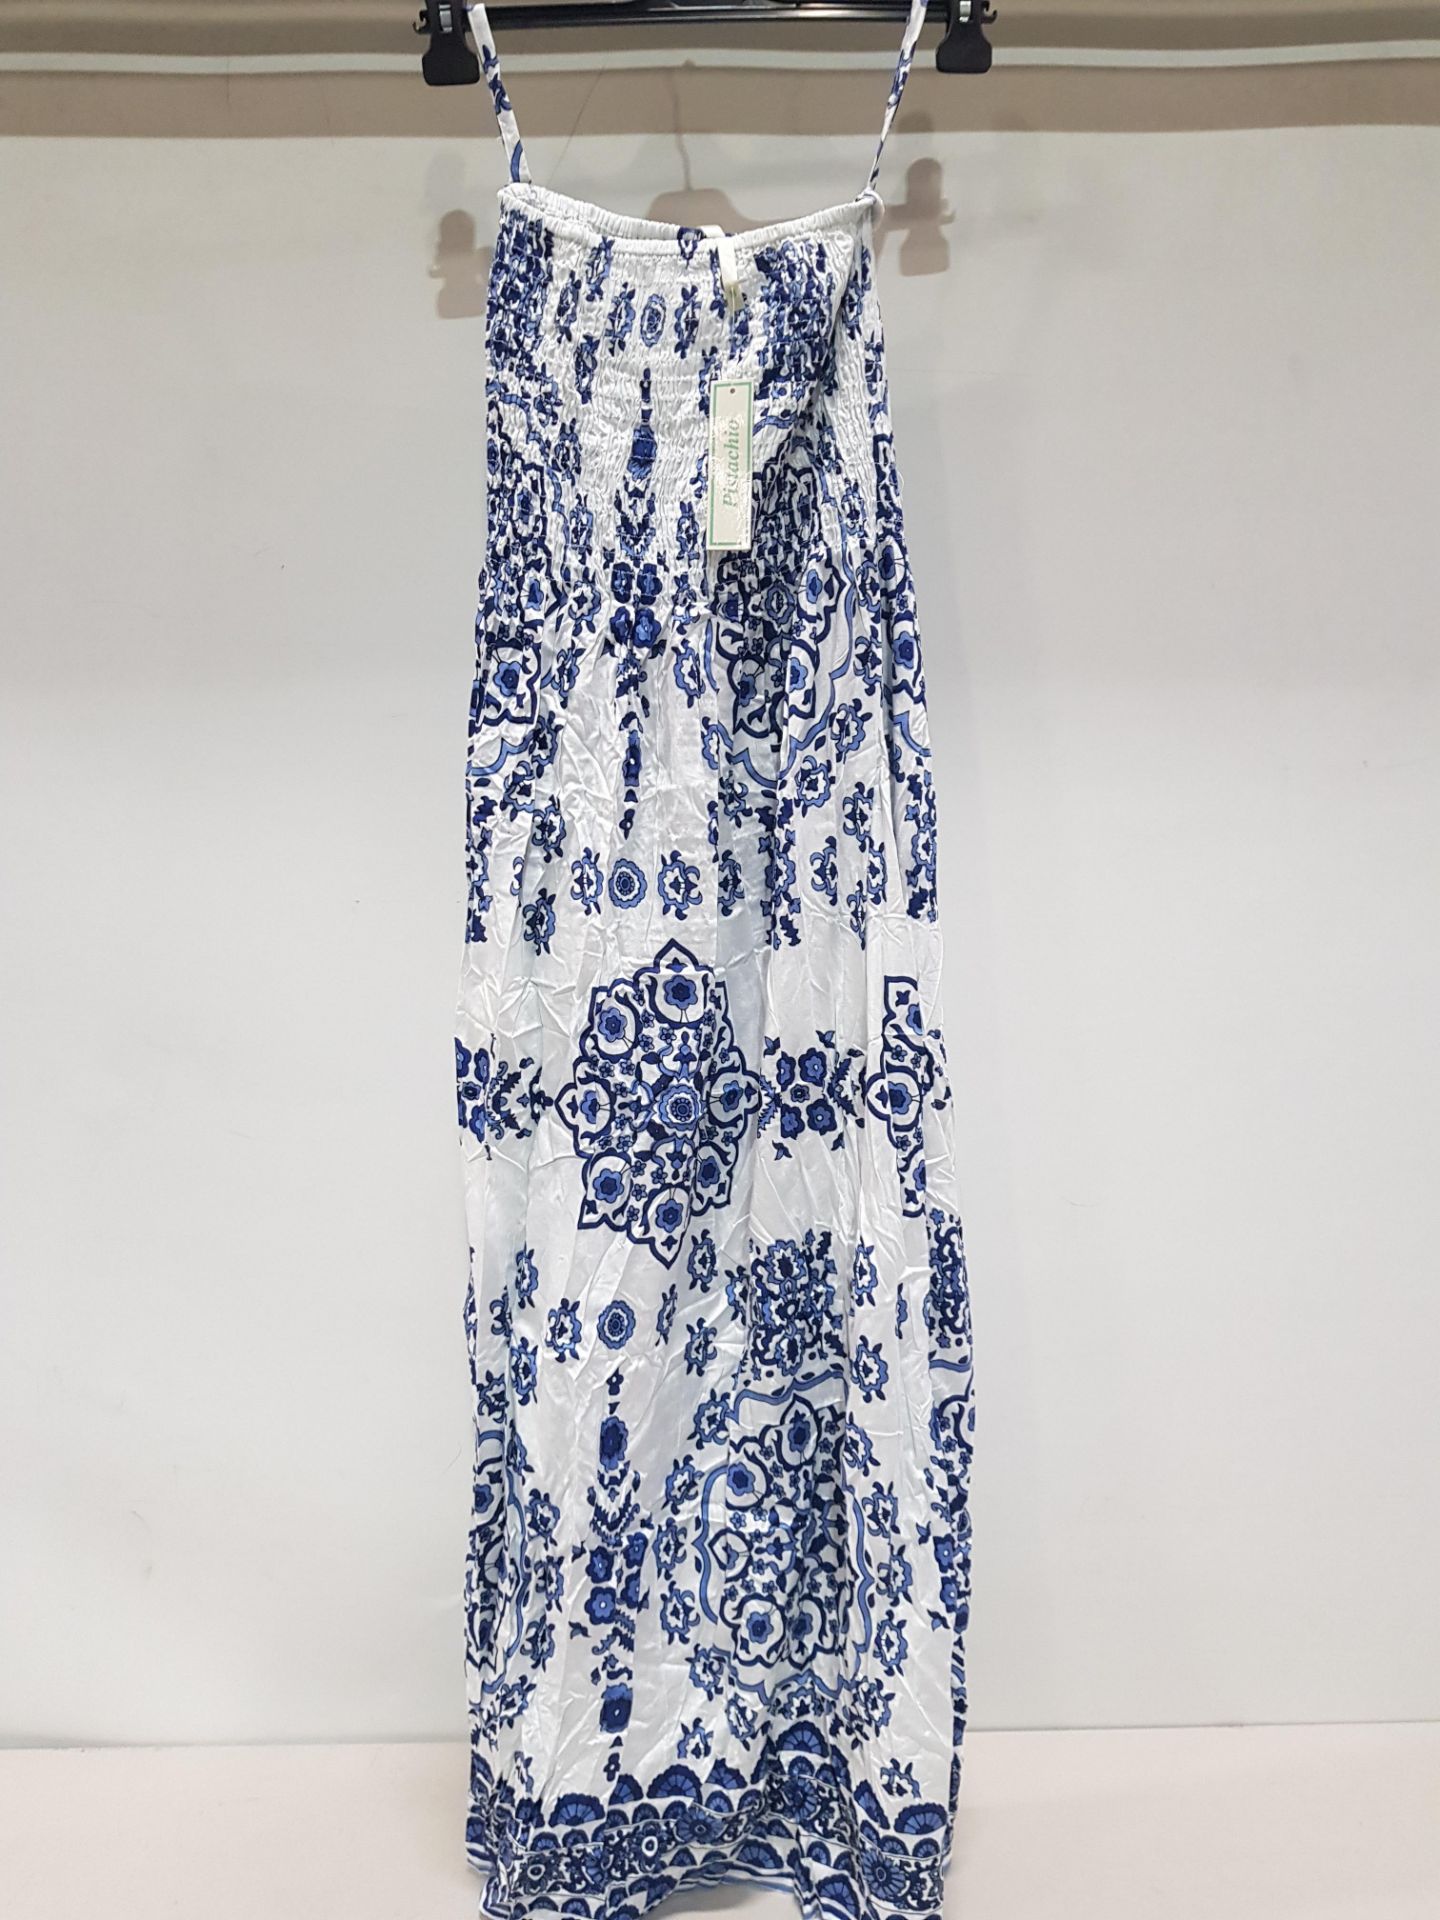 9 X BRAND NEW PISTACHIO BLUE PAISLEY SUMMER DRESS SIZE SMALL RRP £24.99 TOTAL £224.91